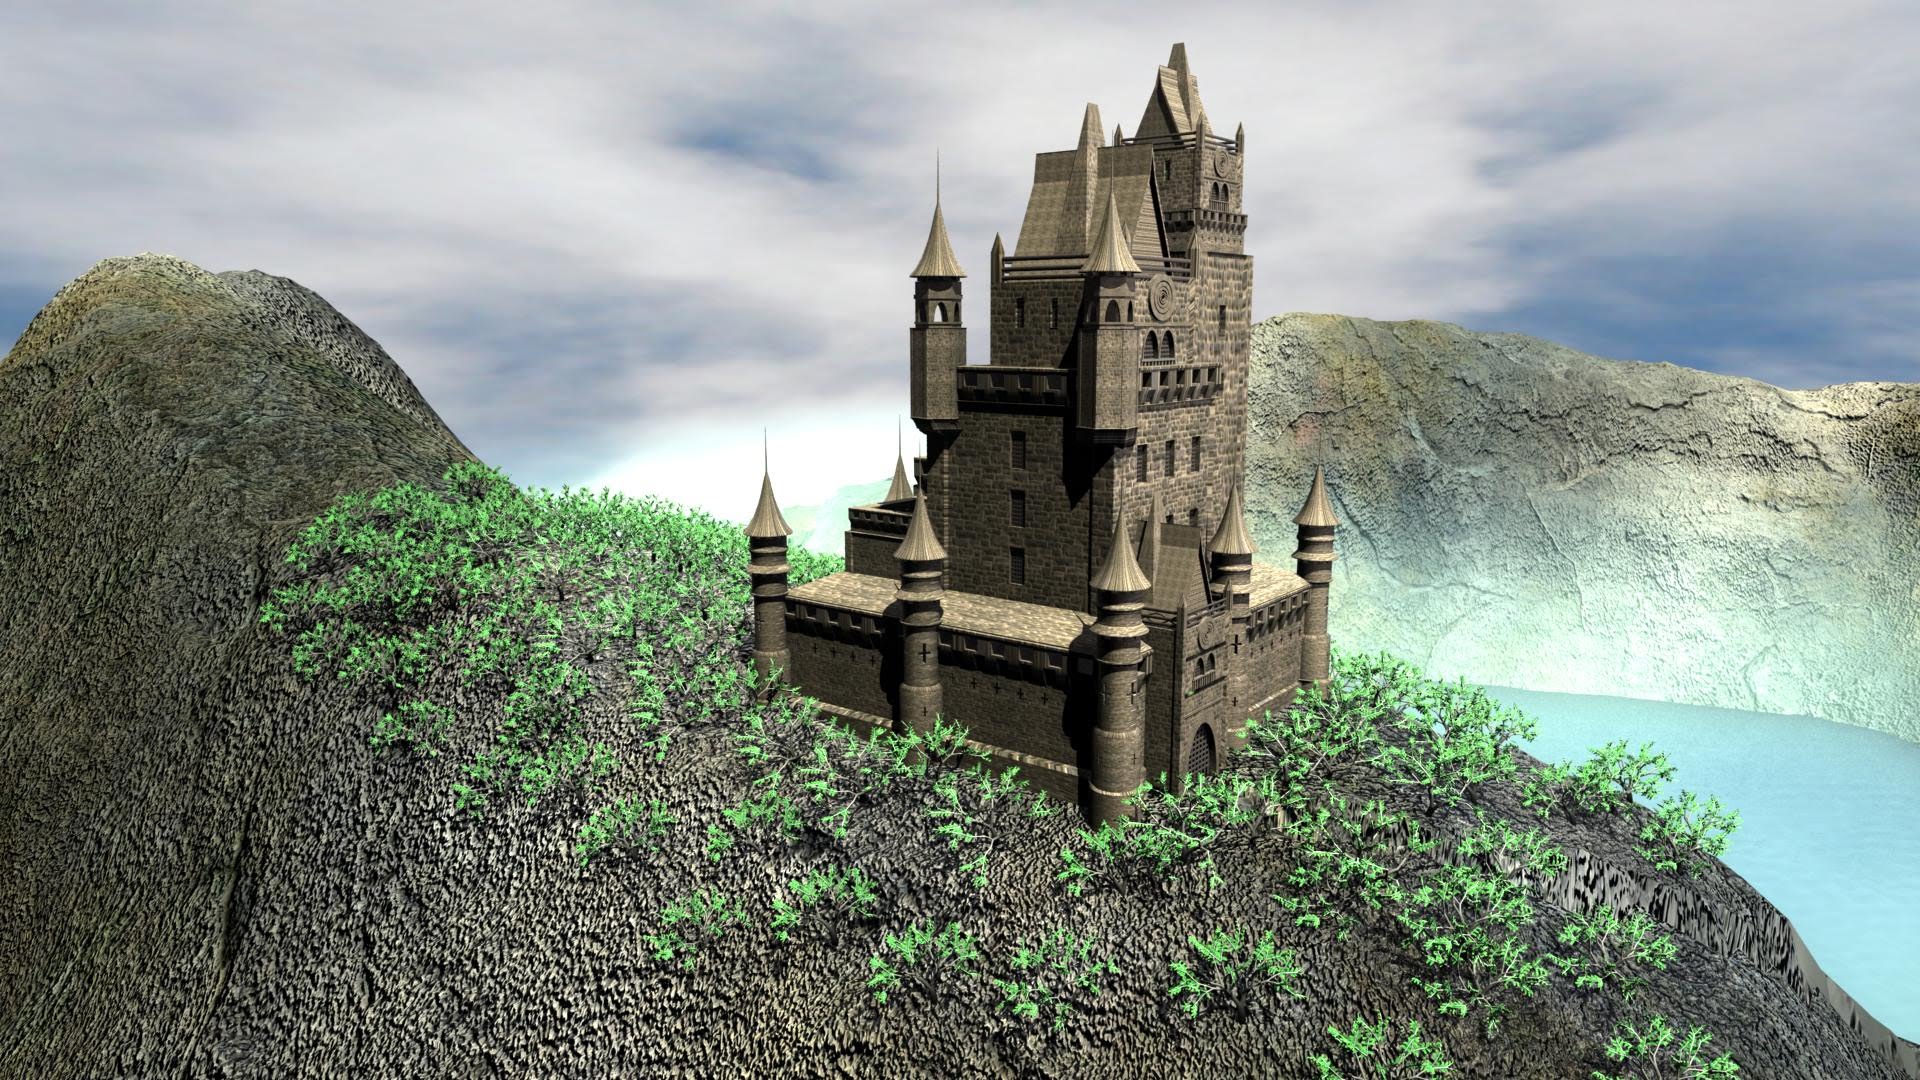 Old castle in an amazing place - Maya animation - YouTube